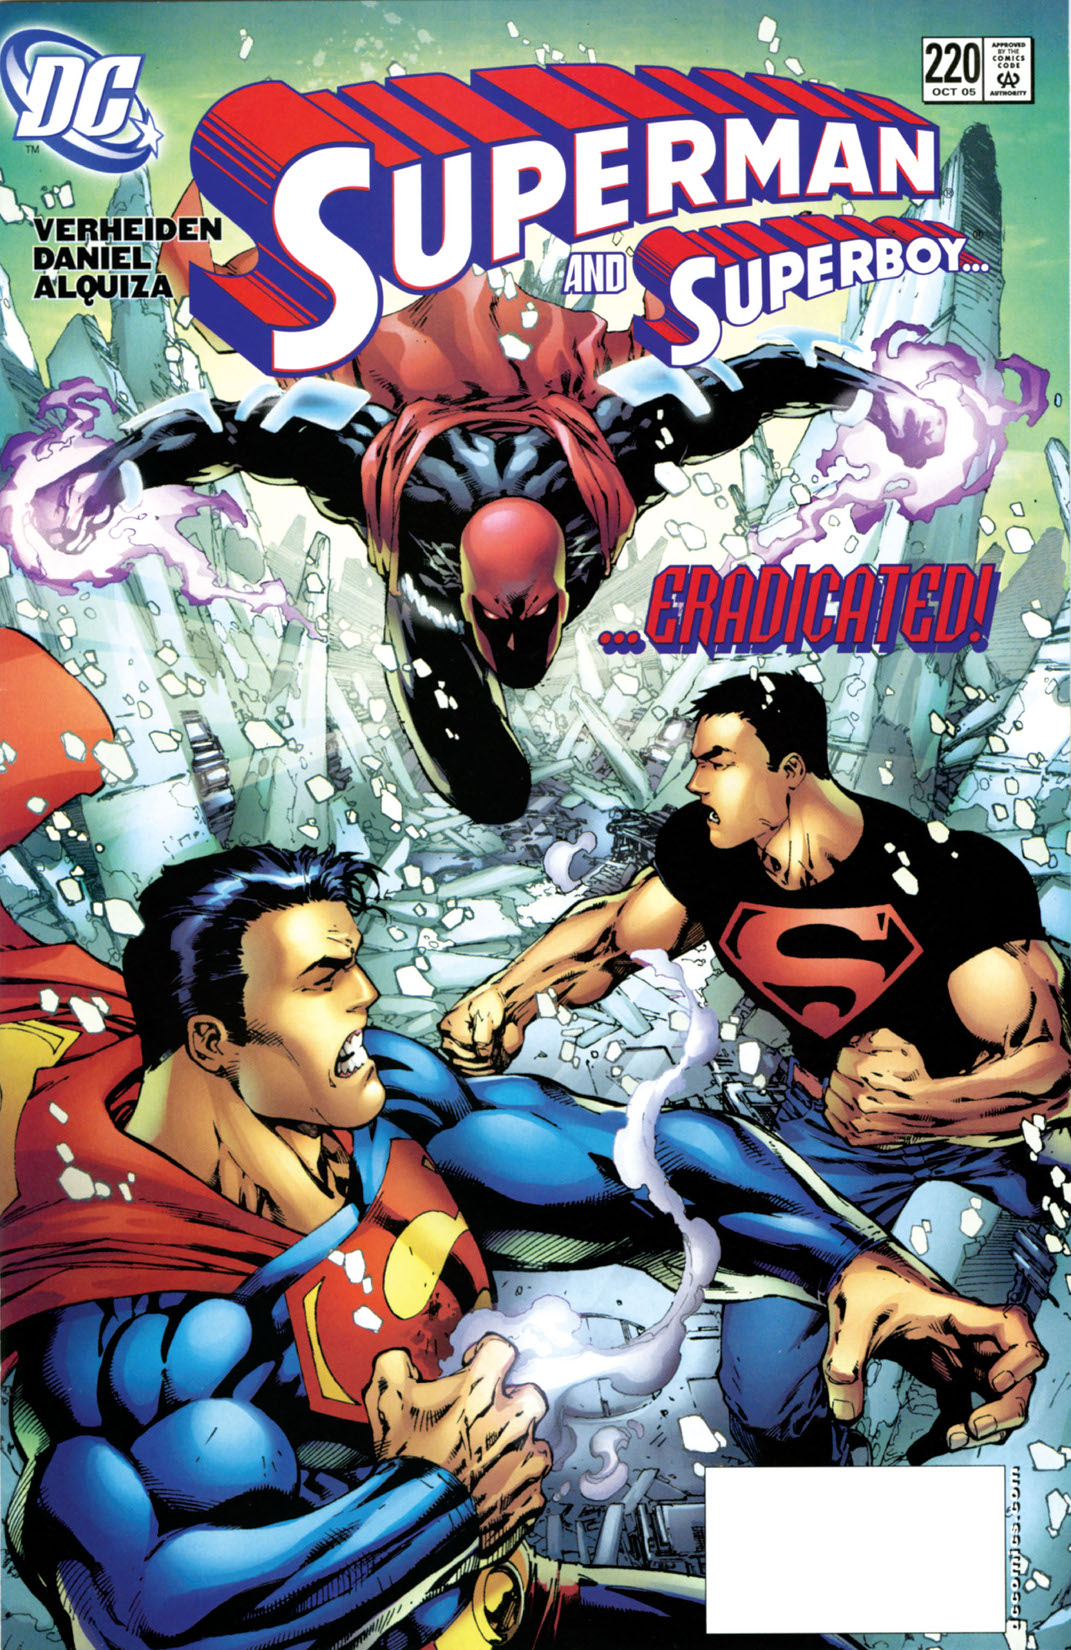 Superman (1986-) #220 preview images